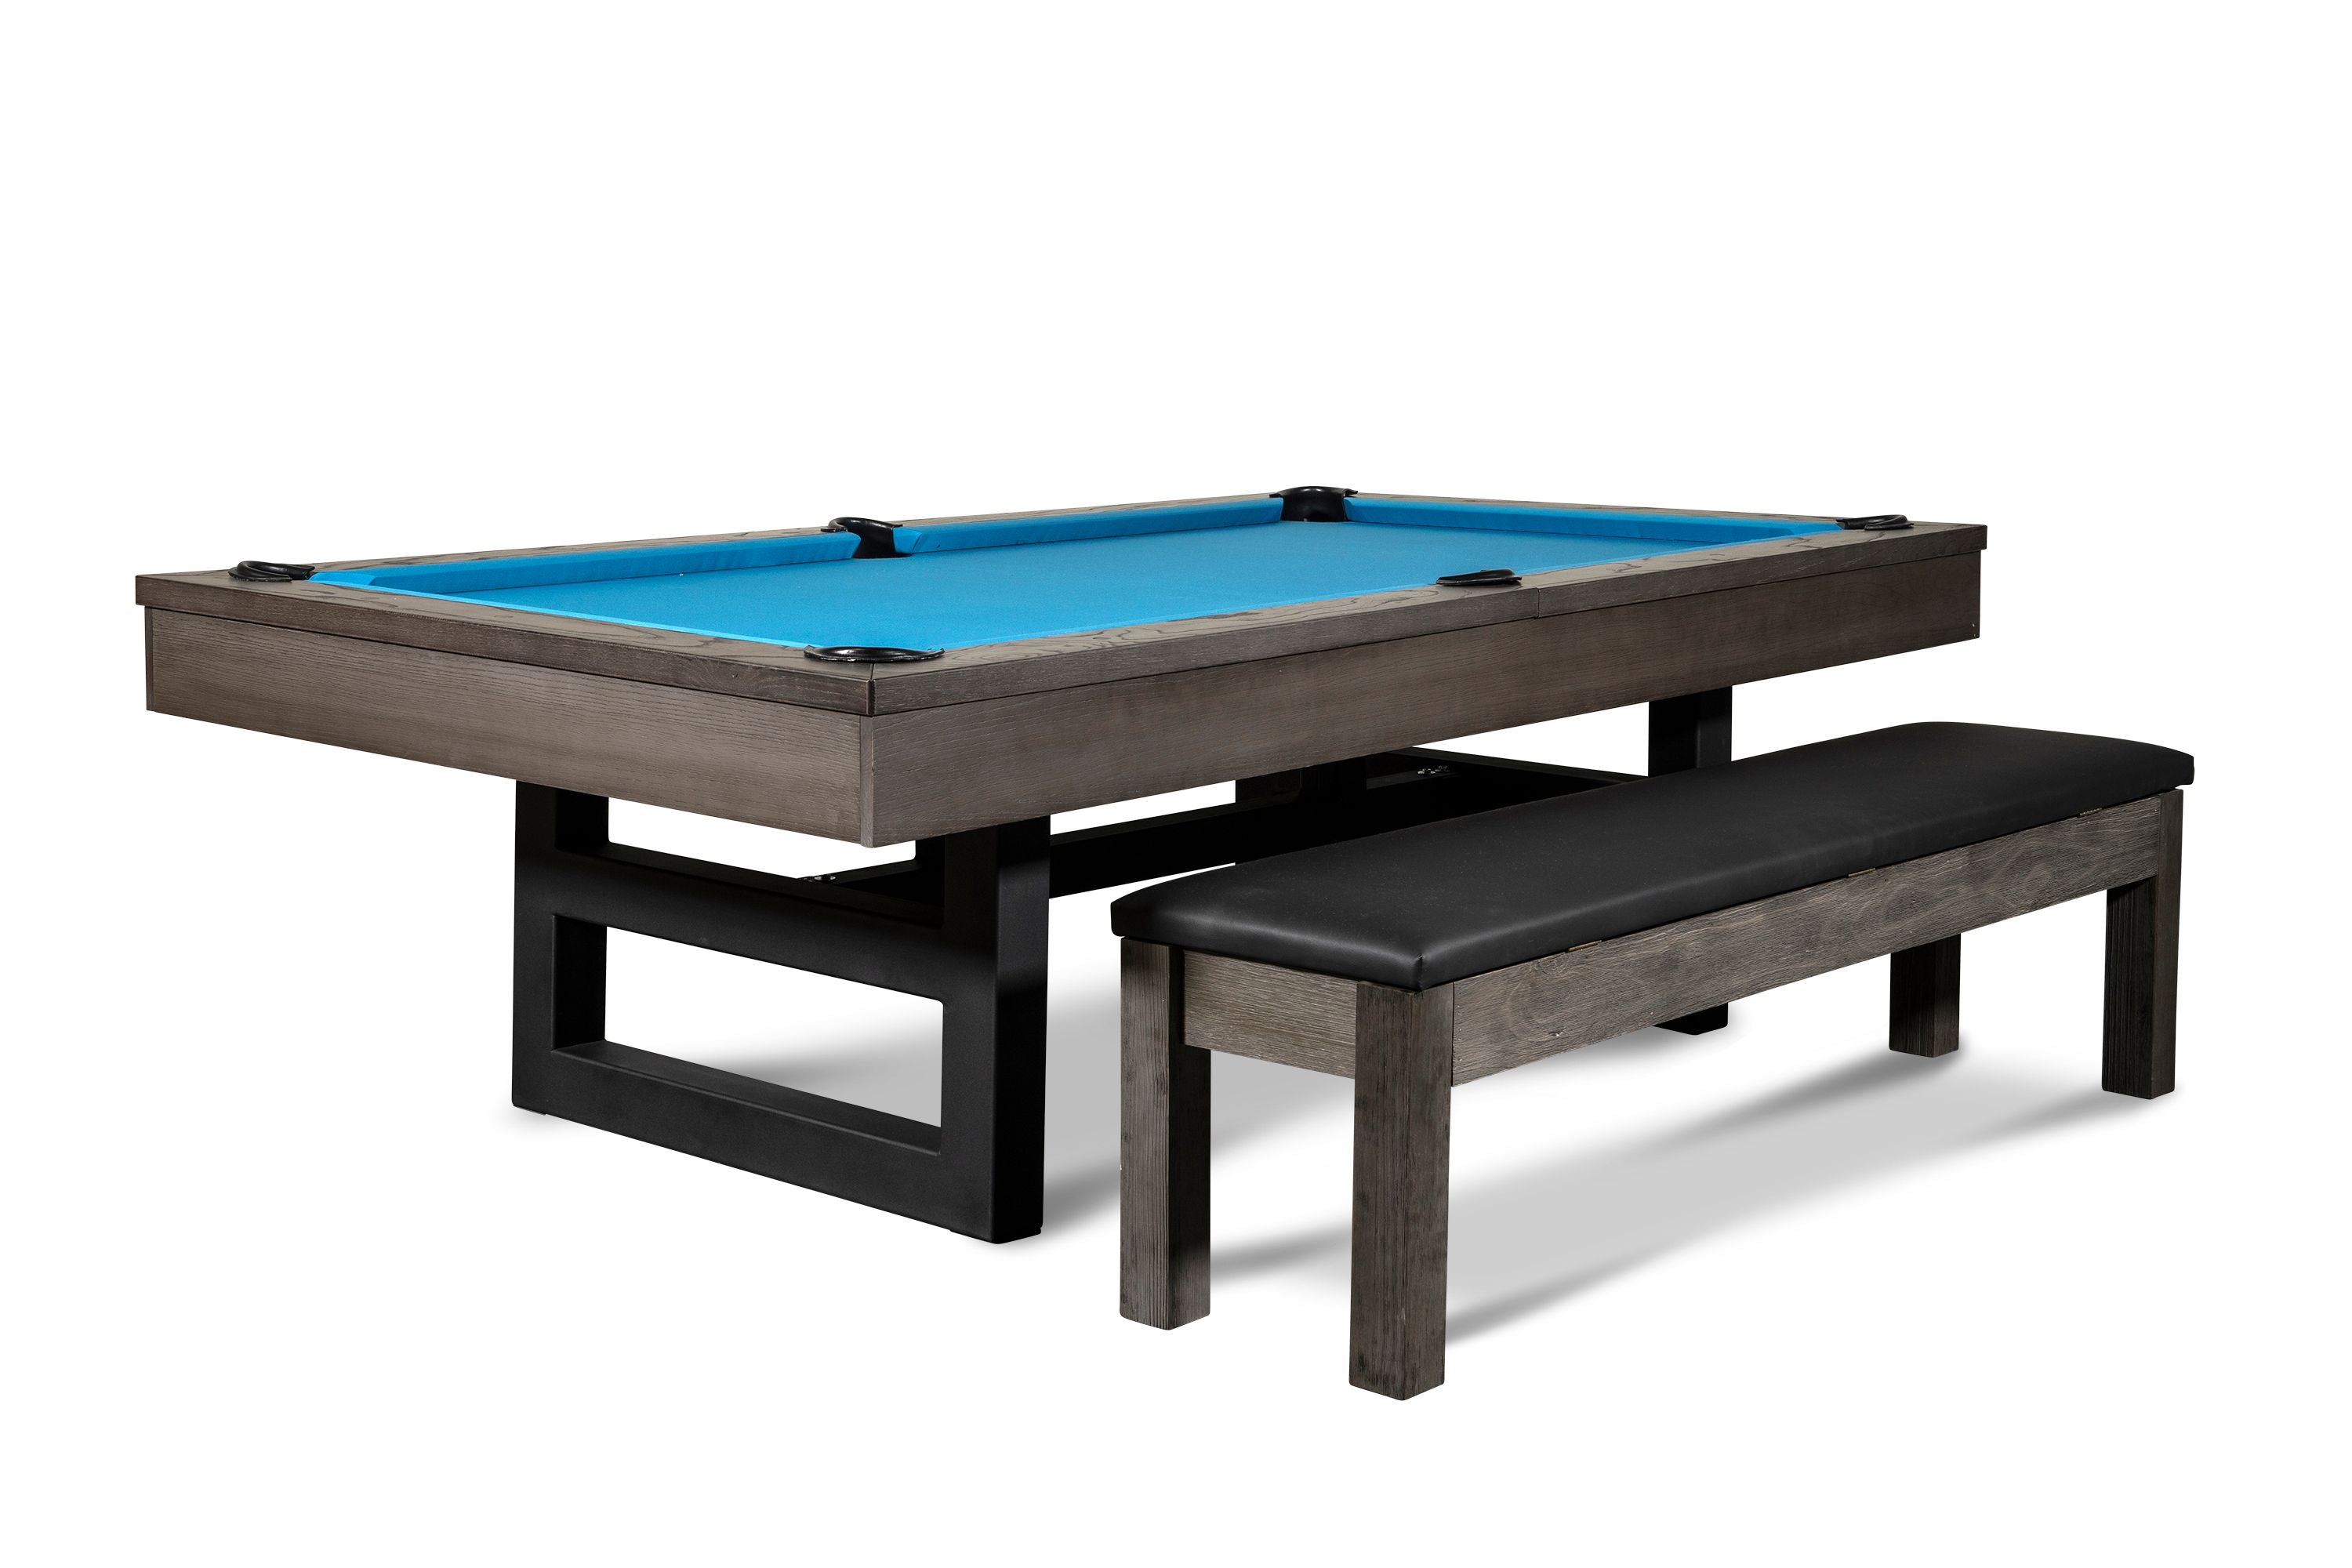 Nixon Billiards Mckay Slate Pool Table ISAF-90070/ISAF-90071 Charcoal With Matching Chair